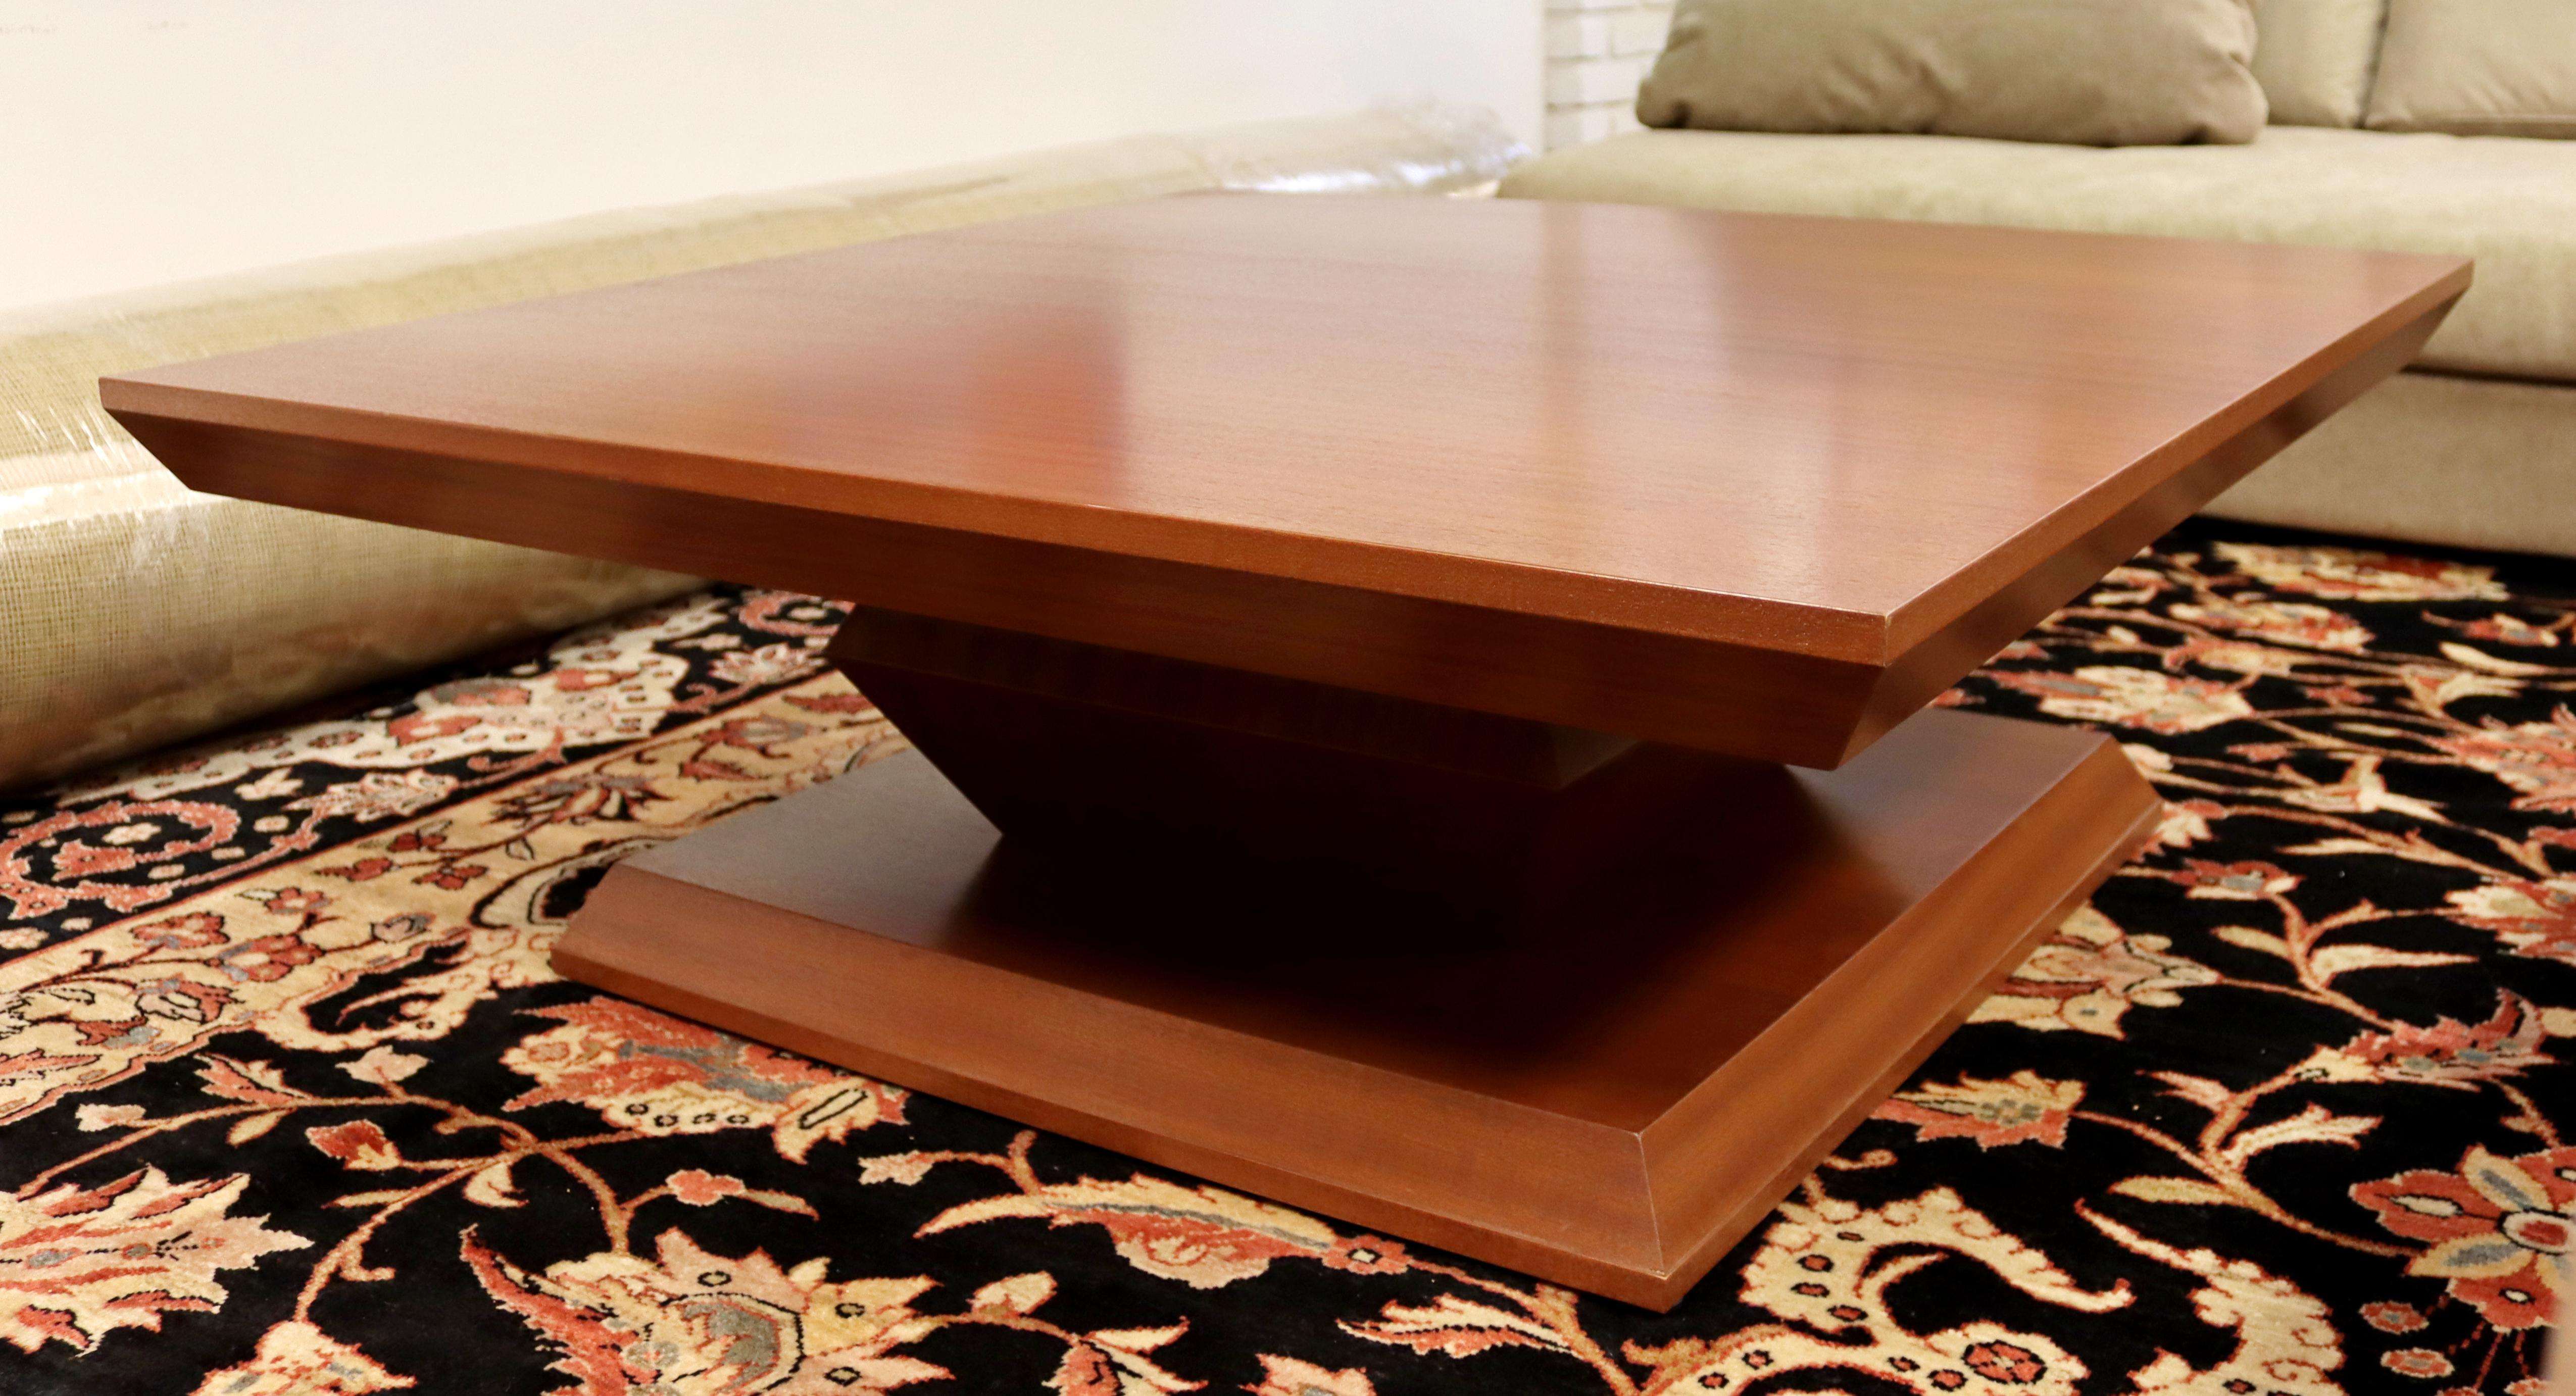 1990s coffee table